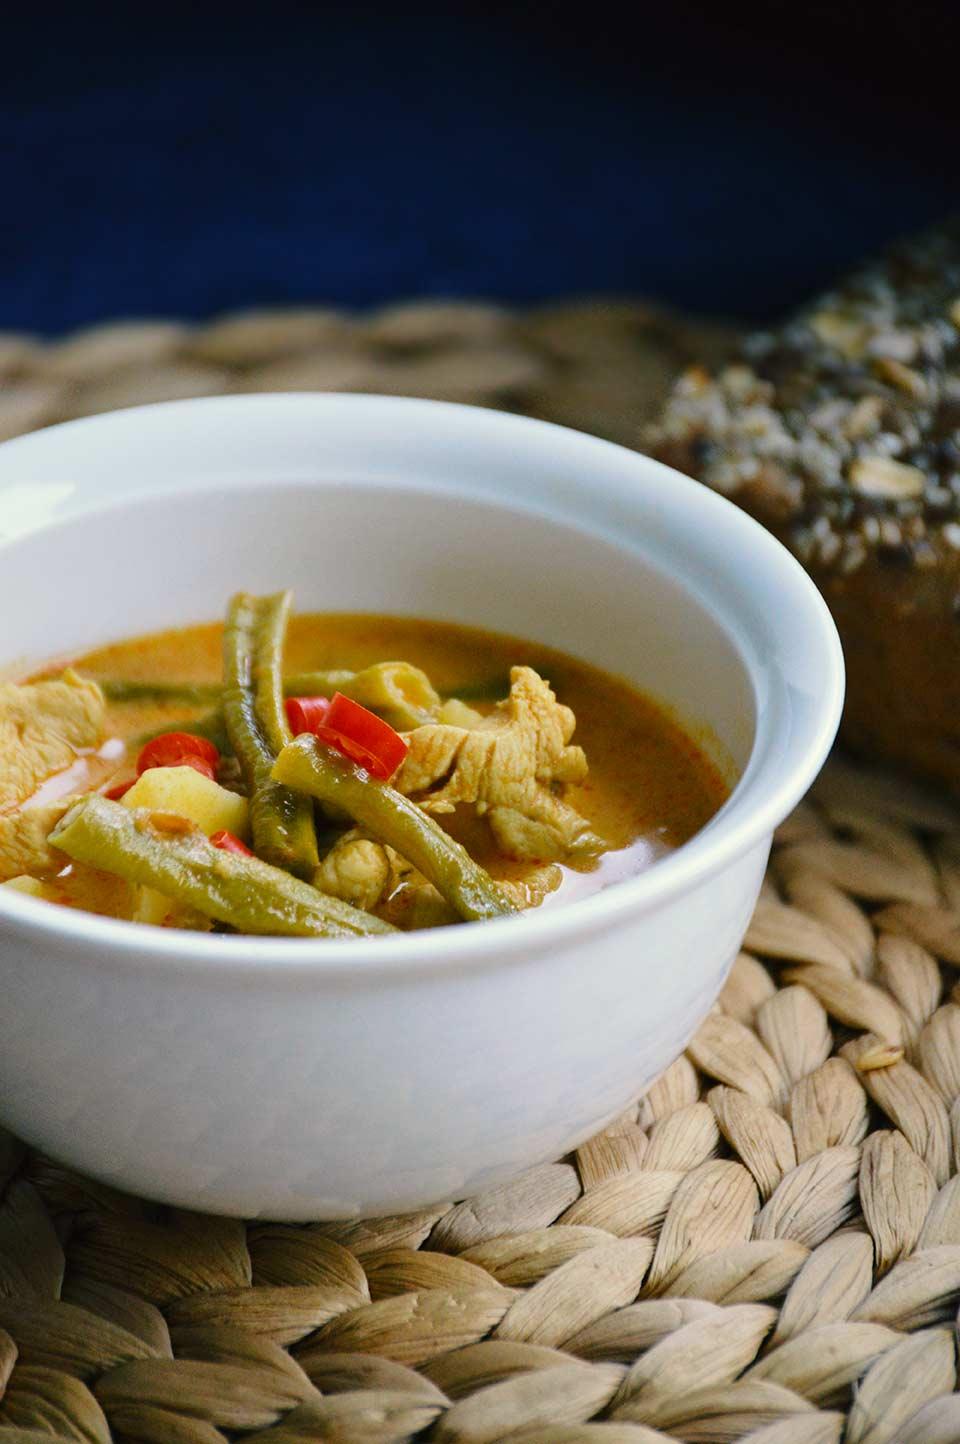 Khmer Curry Recipe from